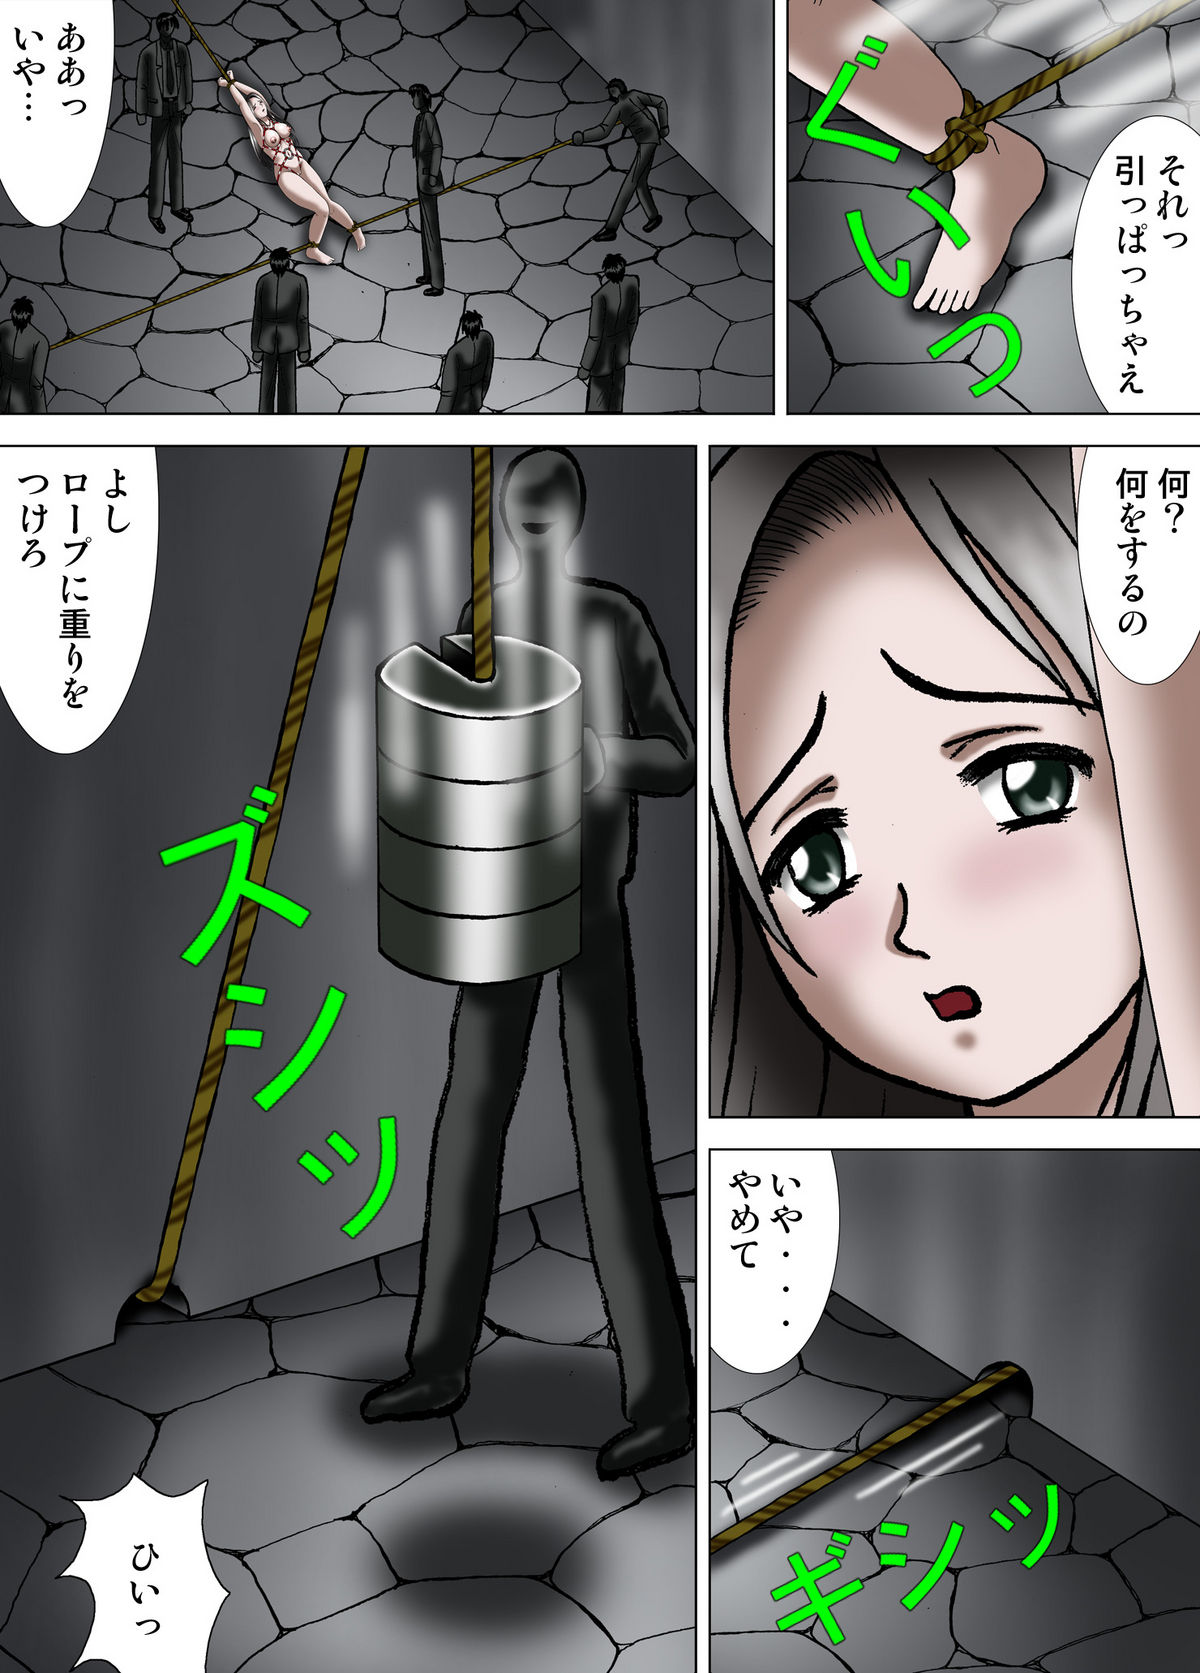 [Kesshousui] Mother and Daughter, Given Leg Split [Aka (Seki)] 読者を釣った架空のエロ漫画 (Touhou Project)